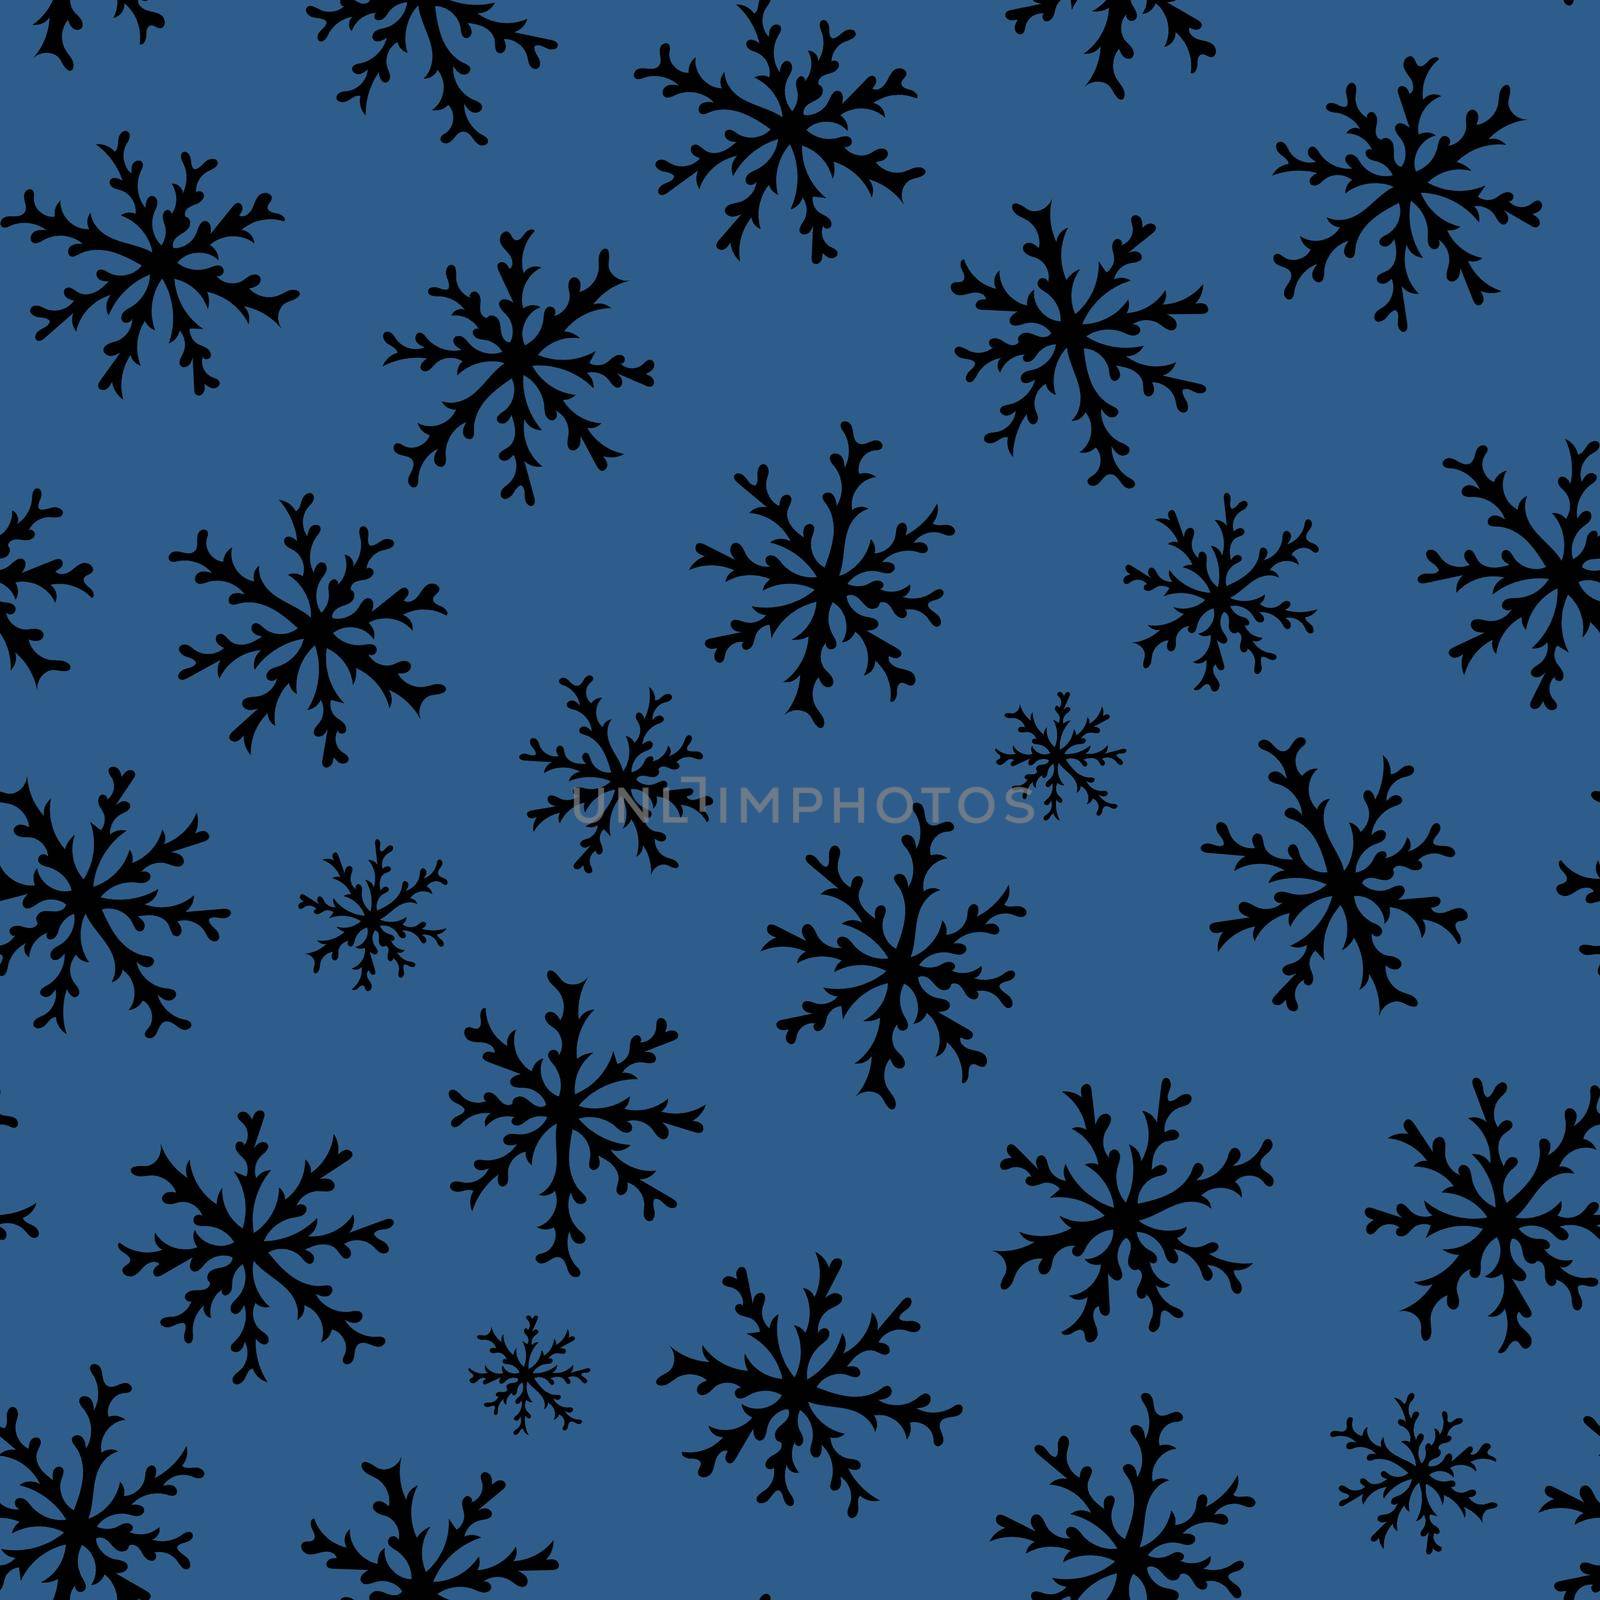 Seamless Pattern with Black Snowflakes on Blue Background. Abstract Hand-Drawn Doodle Snowflakes.